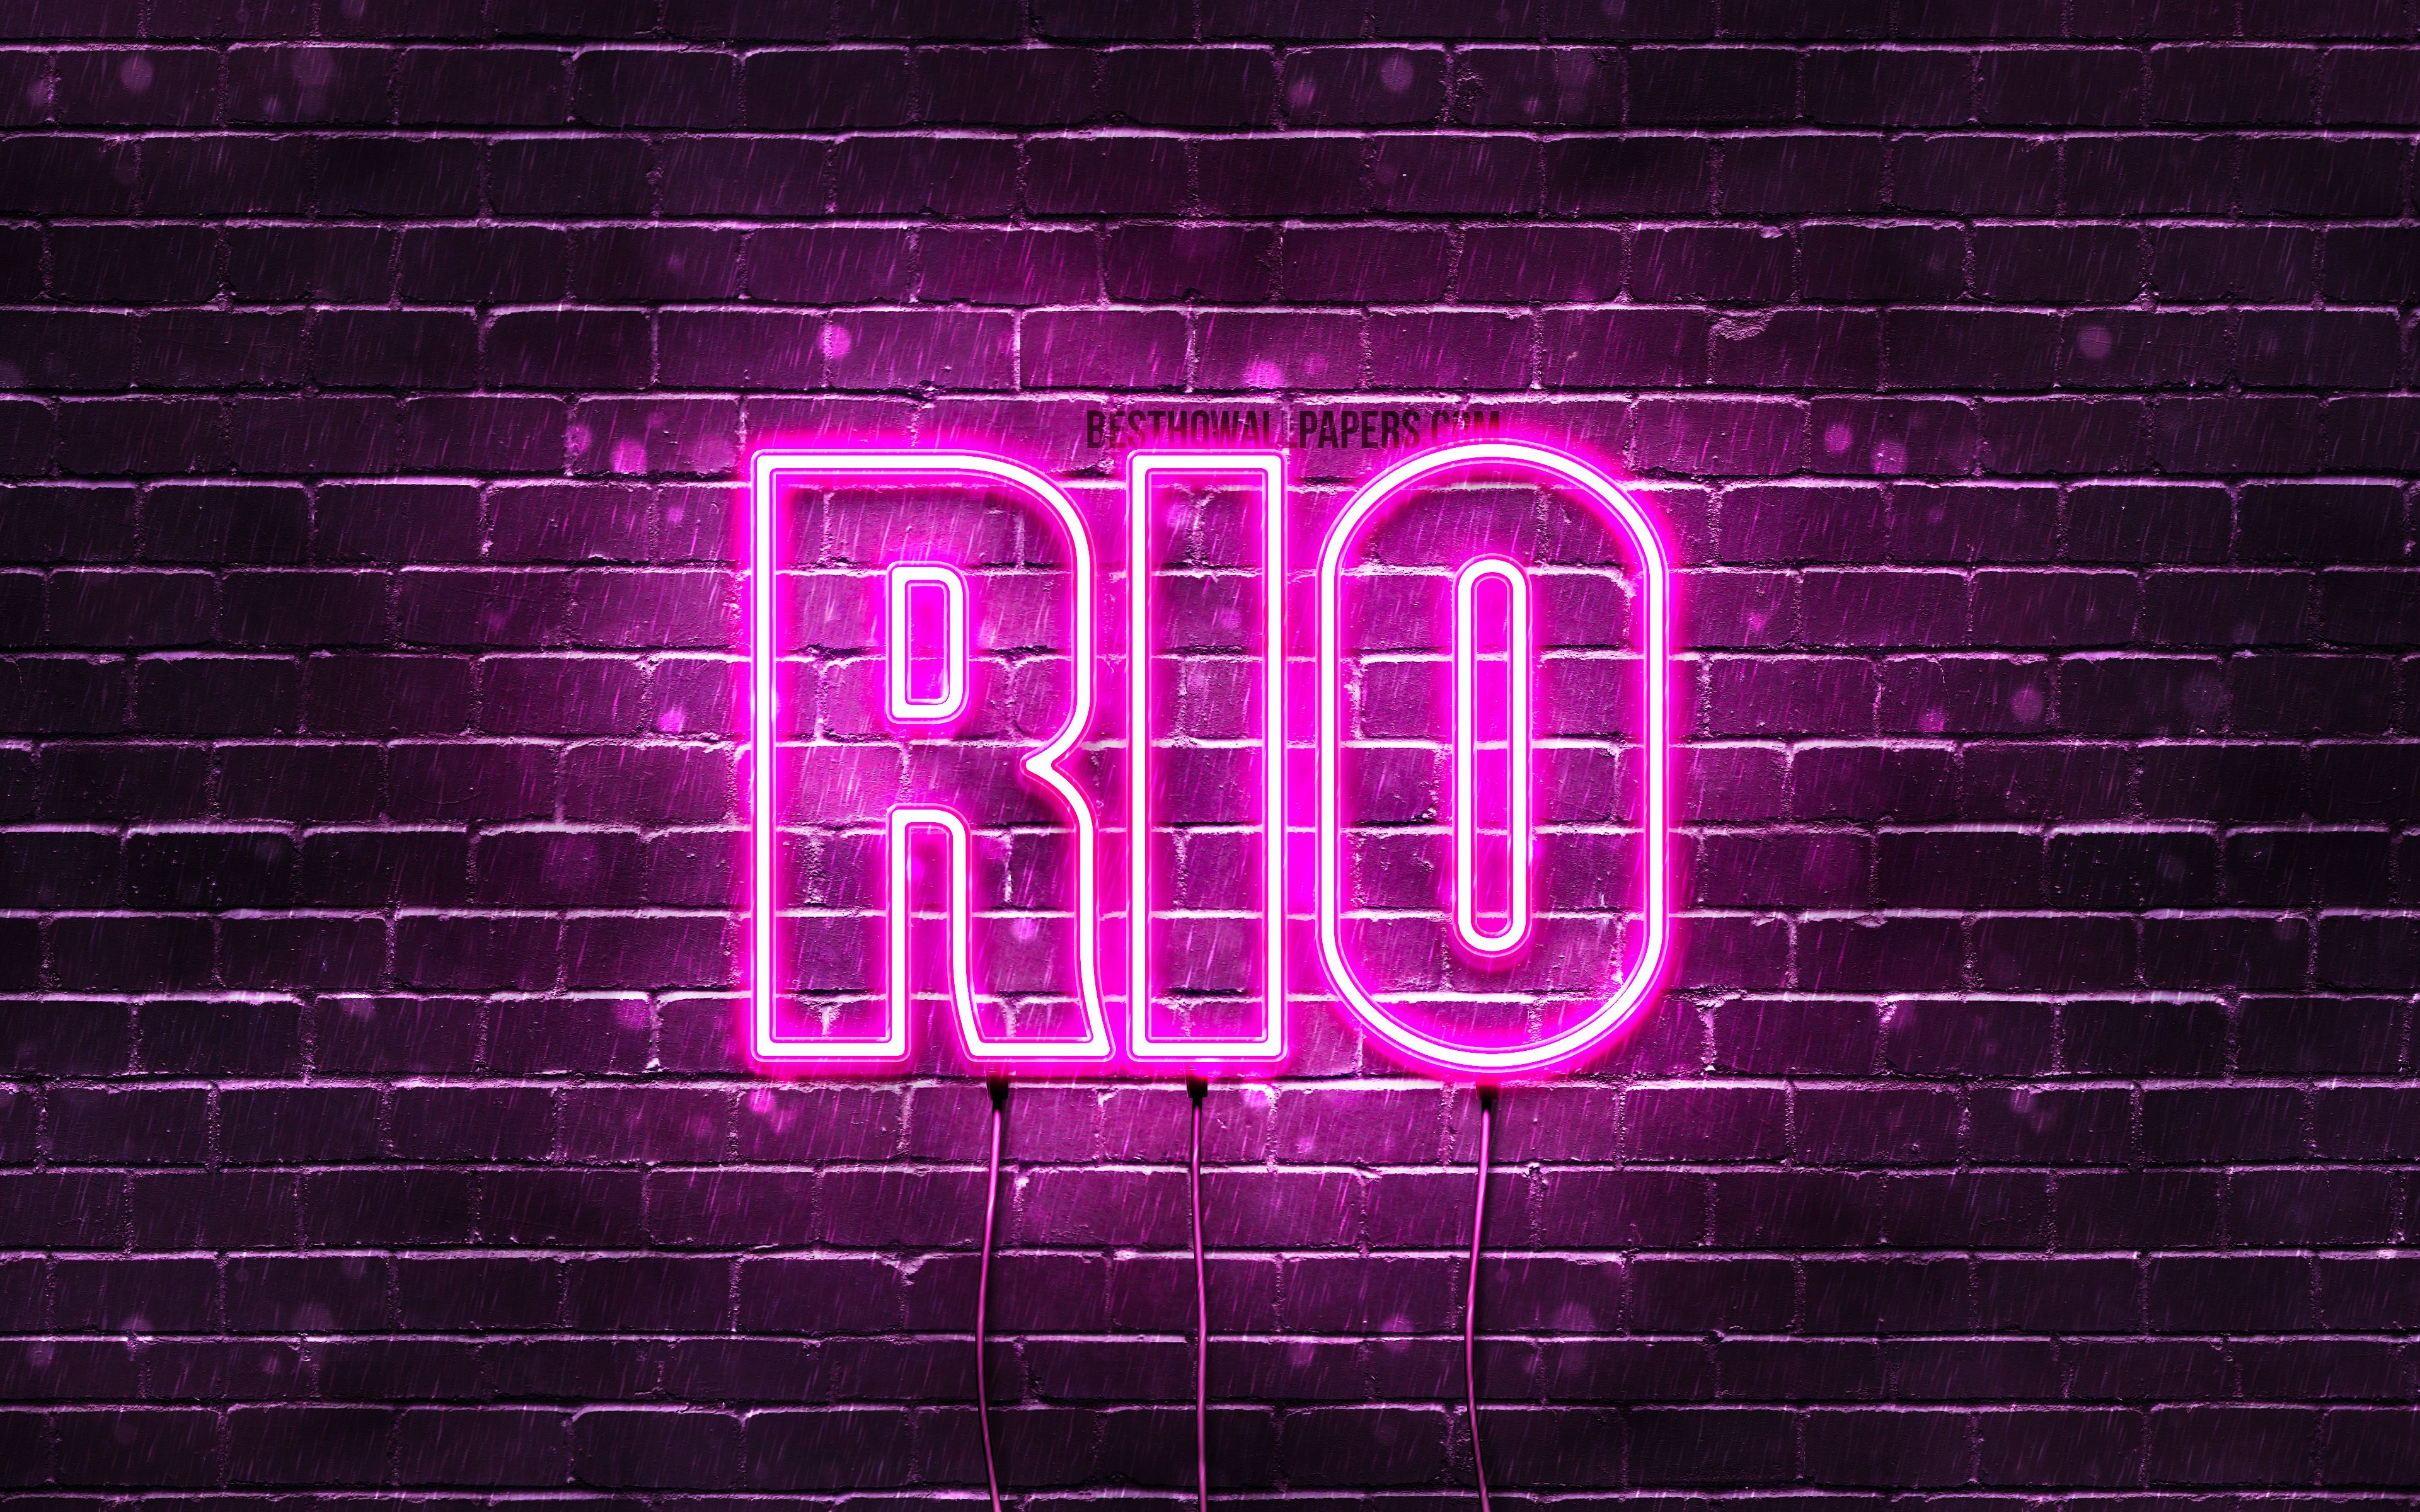 Download wallpaper Rio, 4k, wallpaper with names, female names, Rio name, purple neon lights, Happy Birthday Rio, popular japanese female names, picture with Rio name for desktop with resolution 3840x2400. High Quality